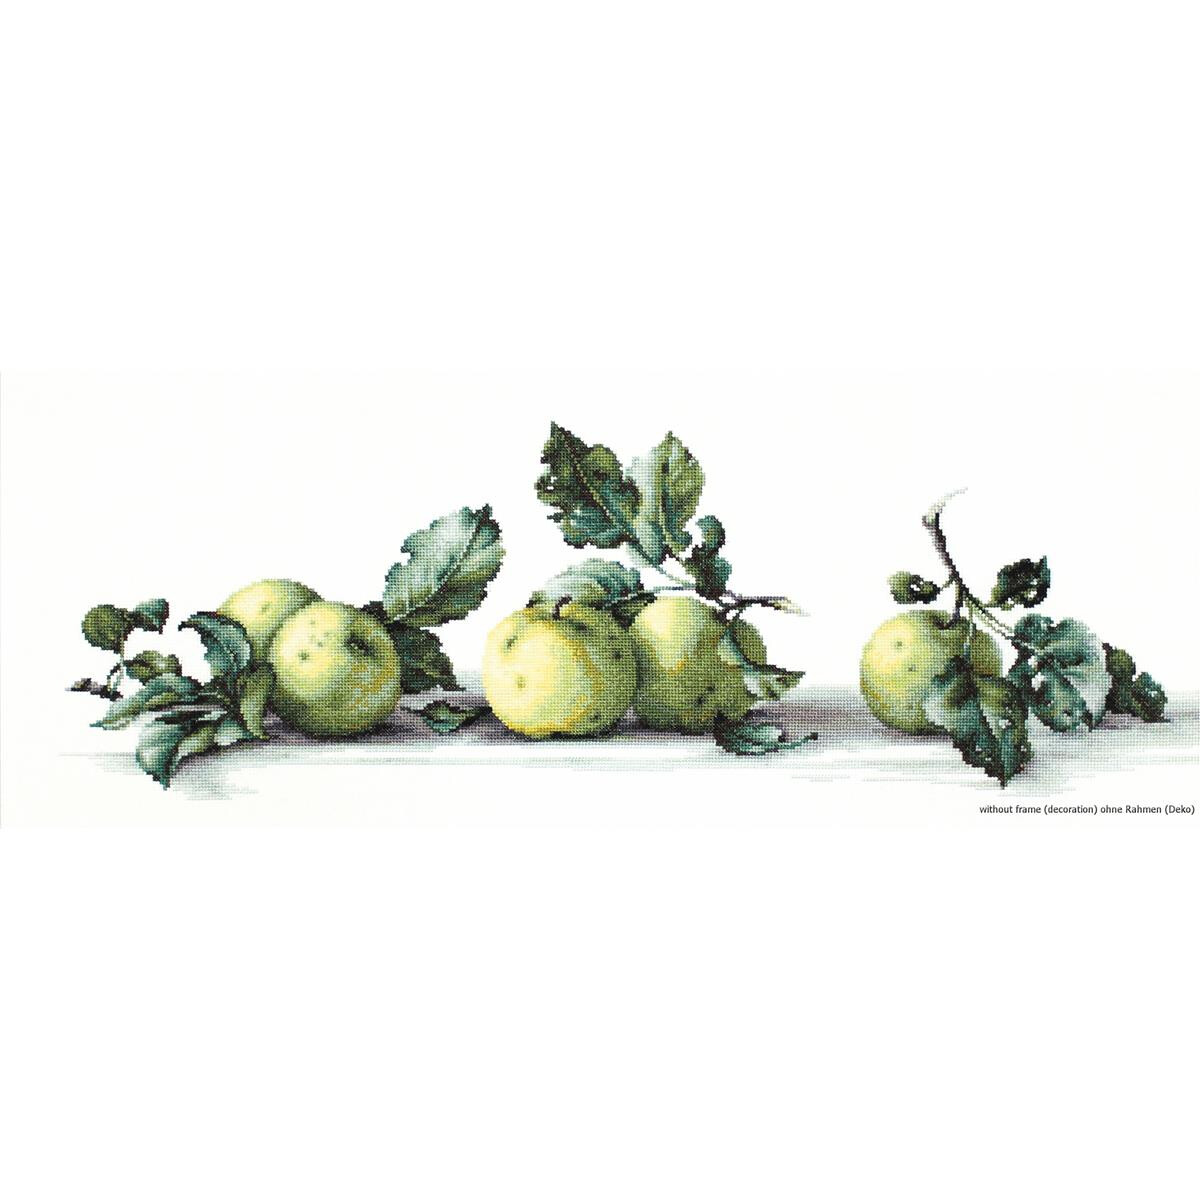 An artistic representation of five green apples with...